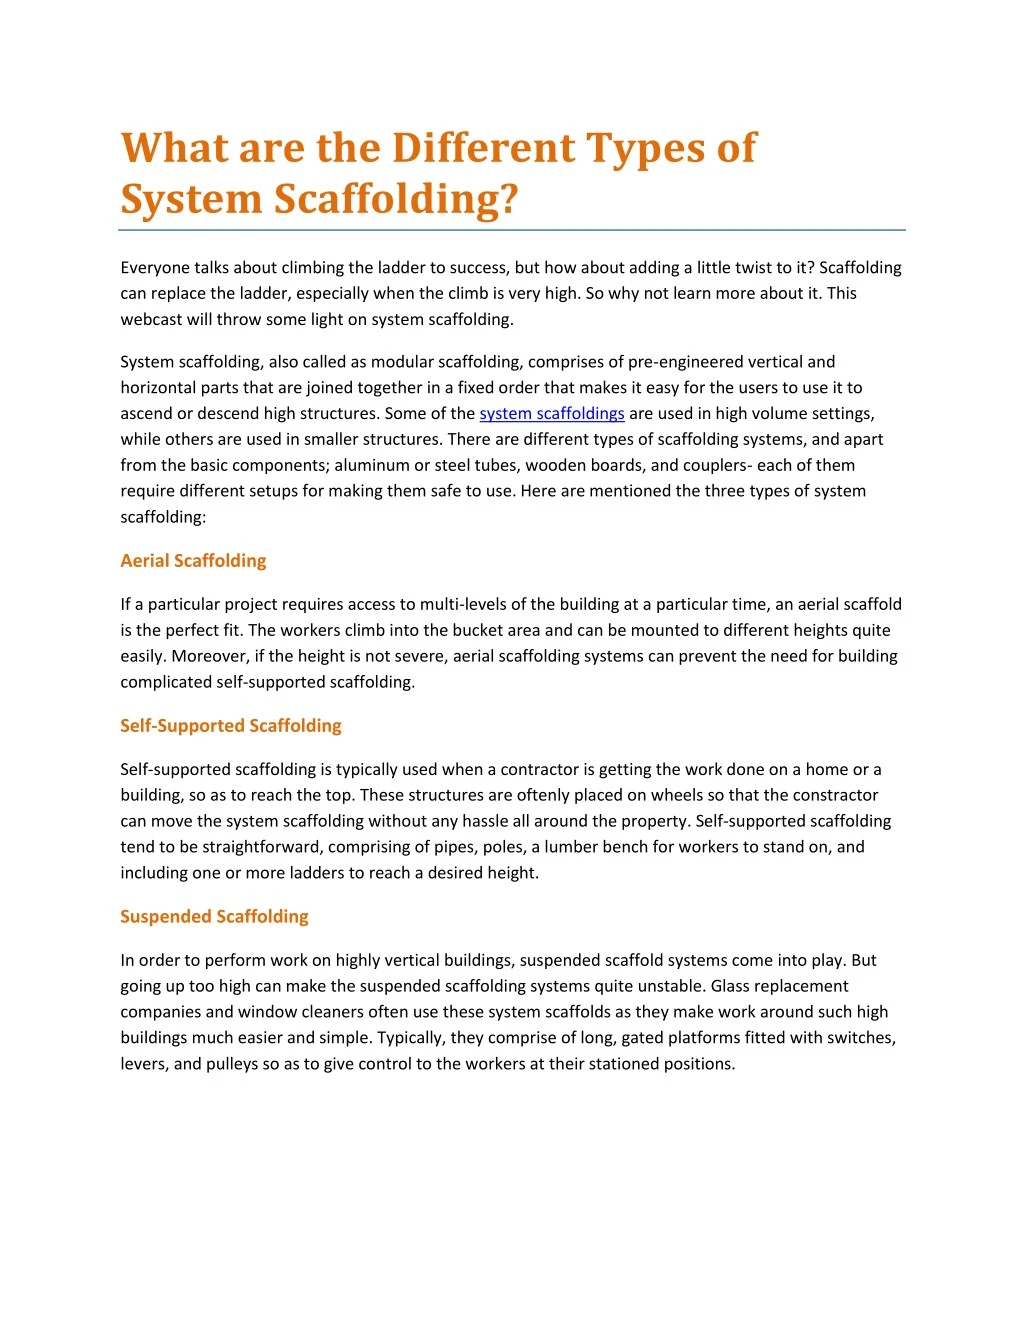 what are the different types of system scaffolding